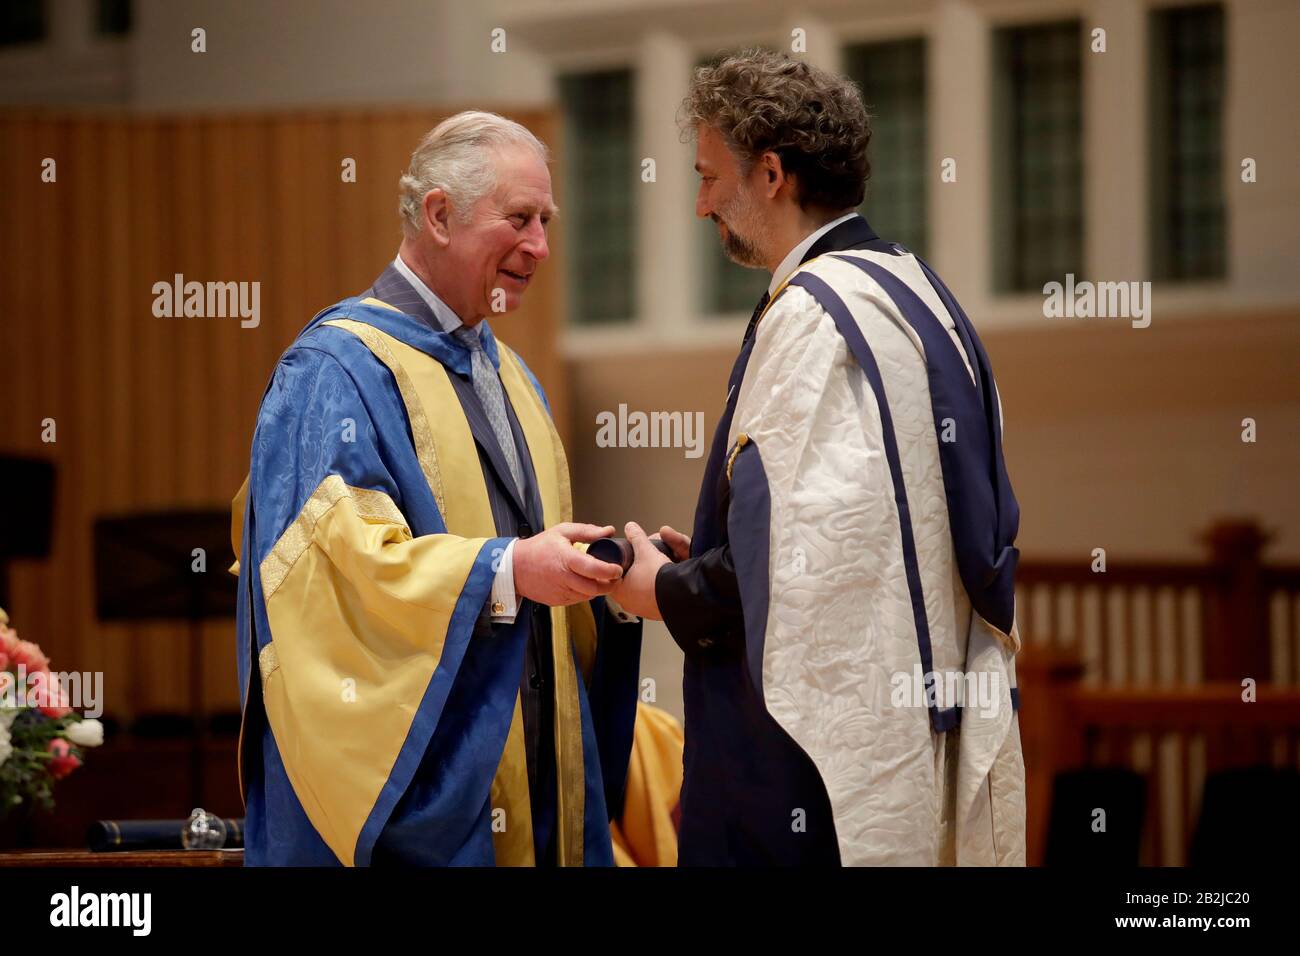 The Prince of Wales Charles presents German operatic tenor Jonas Kaufmann with an honorary Doctor of Music award at the Royal College of Music's annual awards in London. PA Photo. Picture date: Tuesday March 3, 2020. See PA story ROYAL Charles. Photo credit should read: Matt Dunham/PA Wire Stock Photo